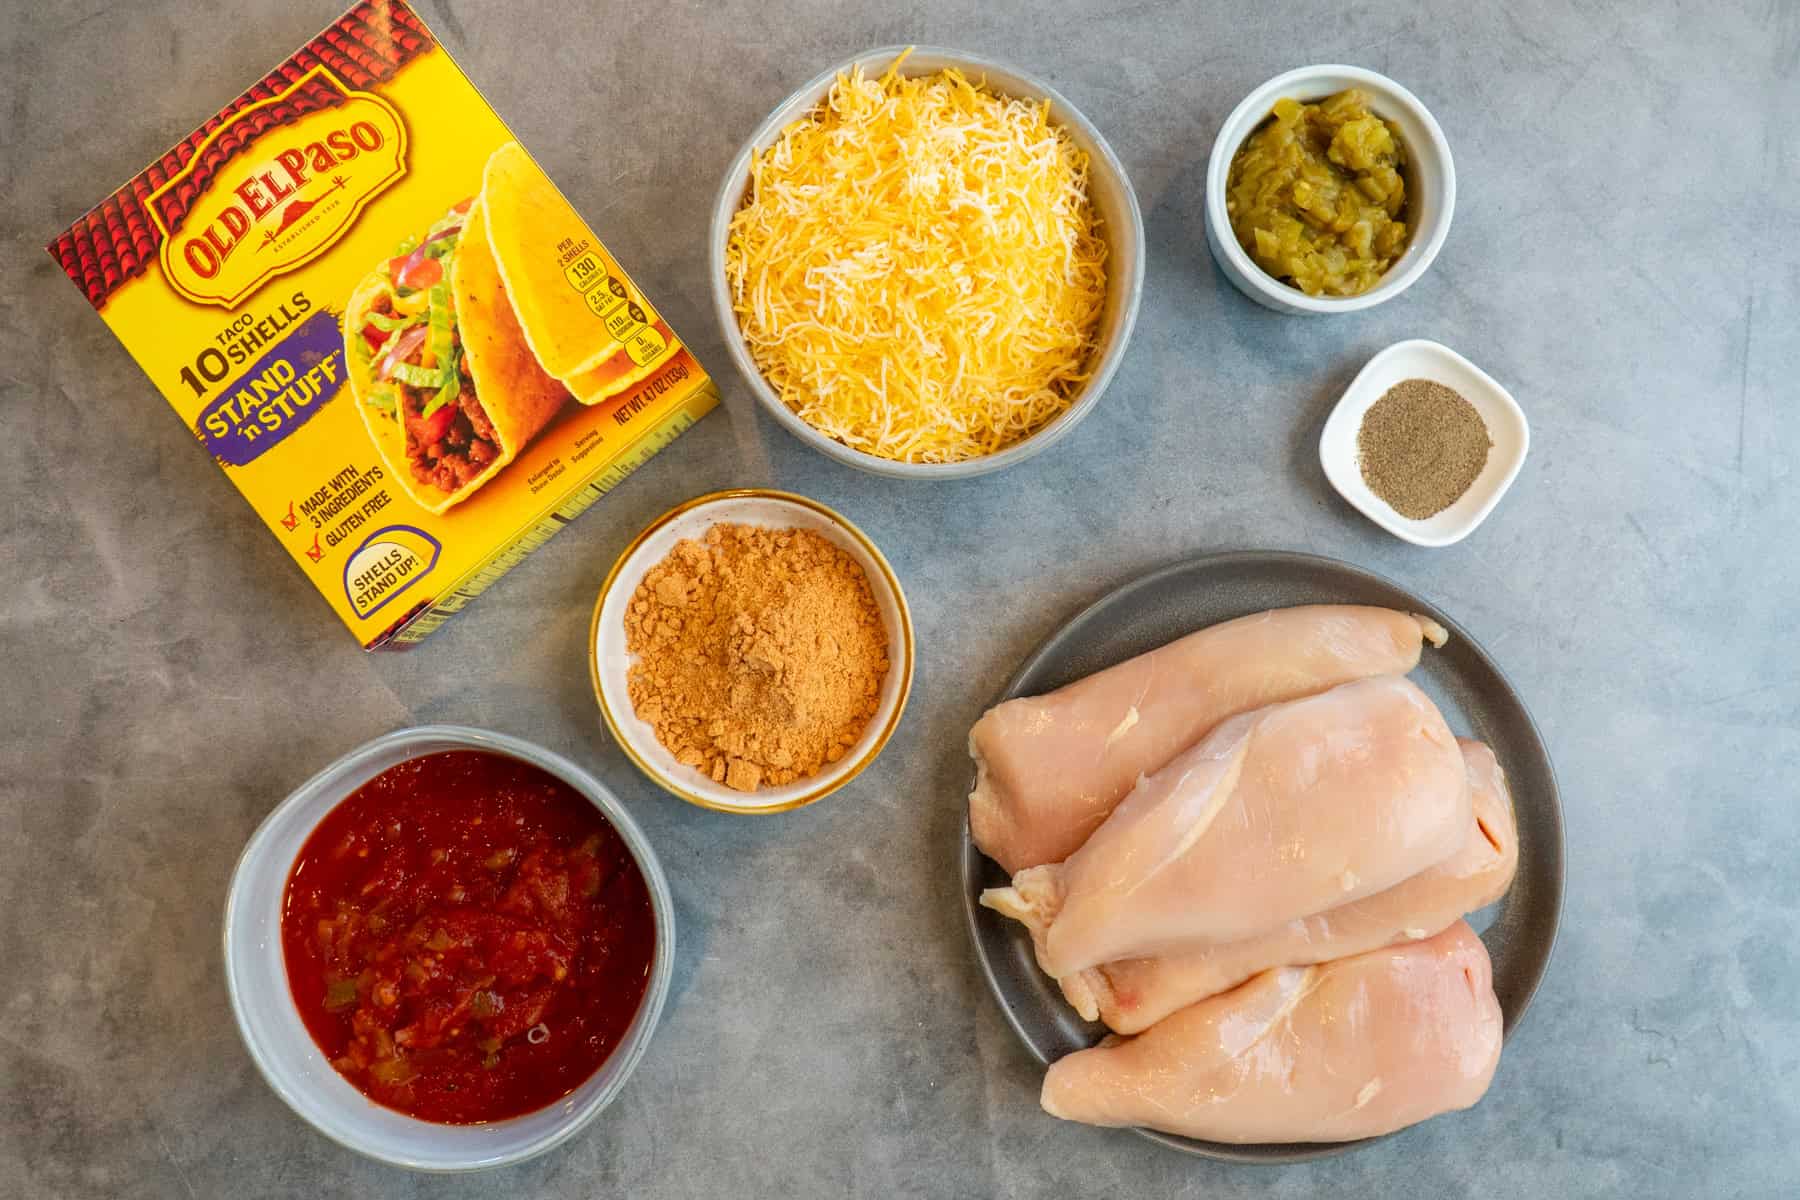 All the ingredients for baked chicken tacos.